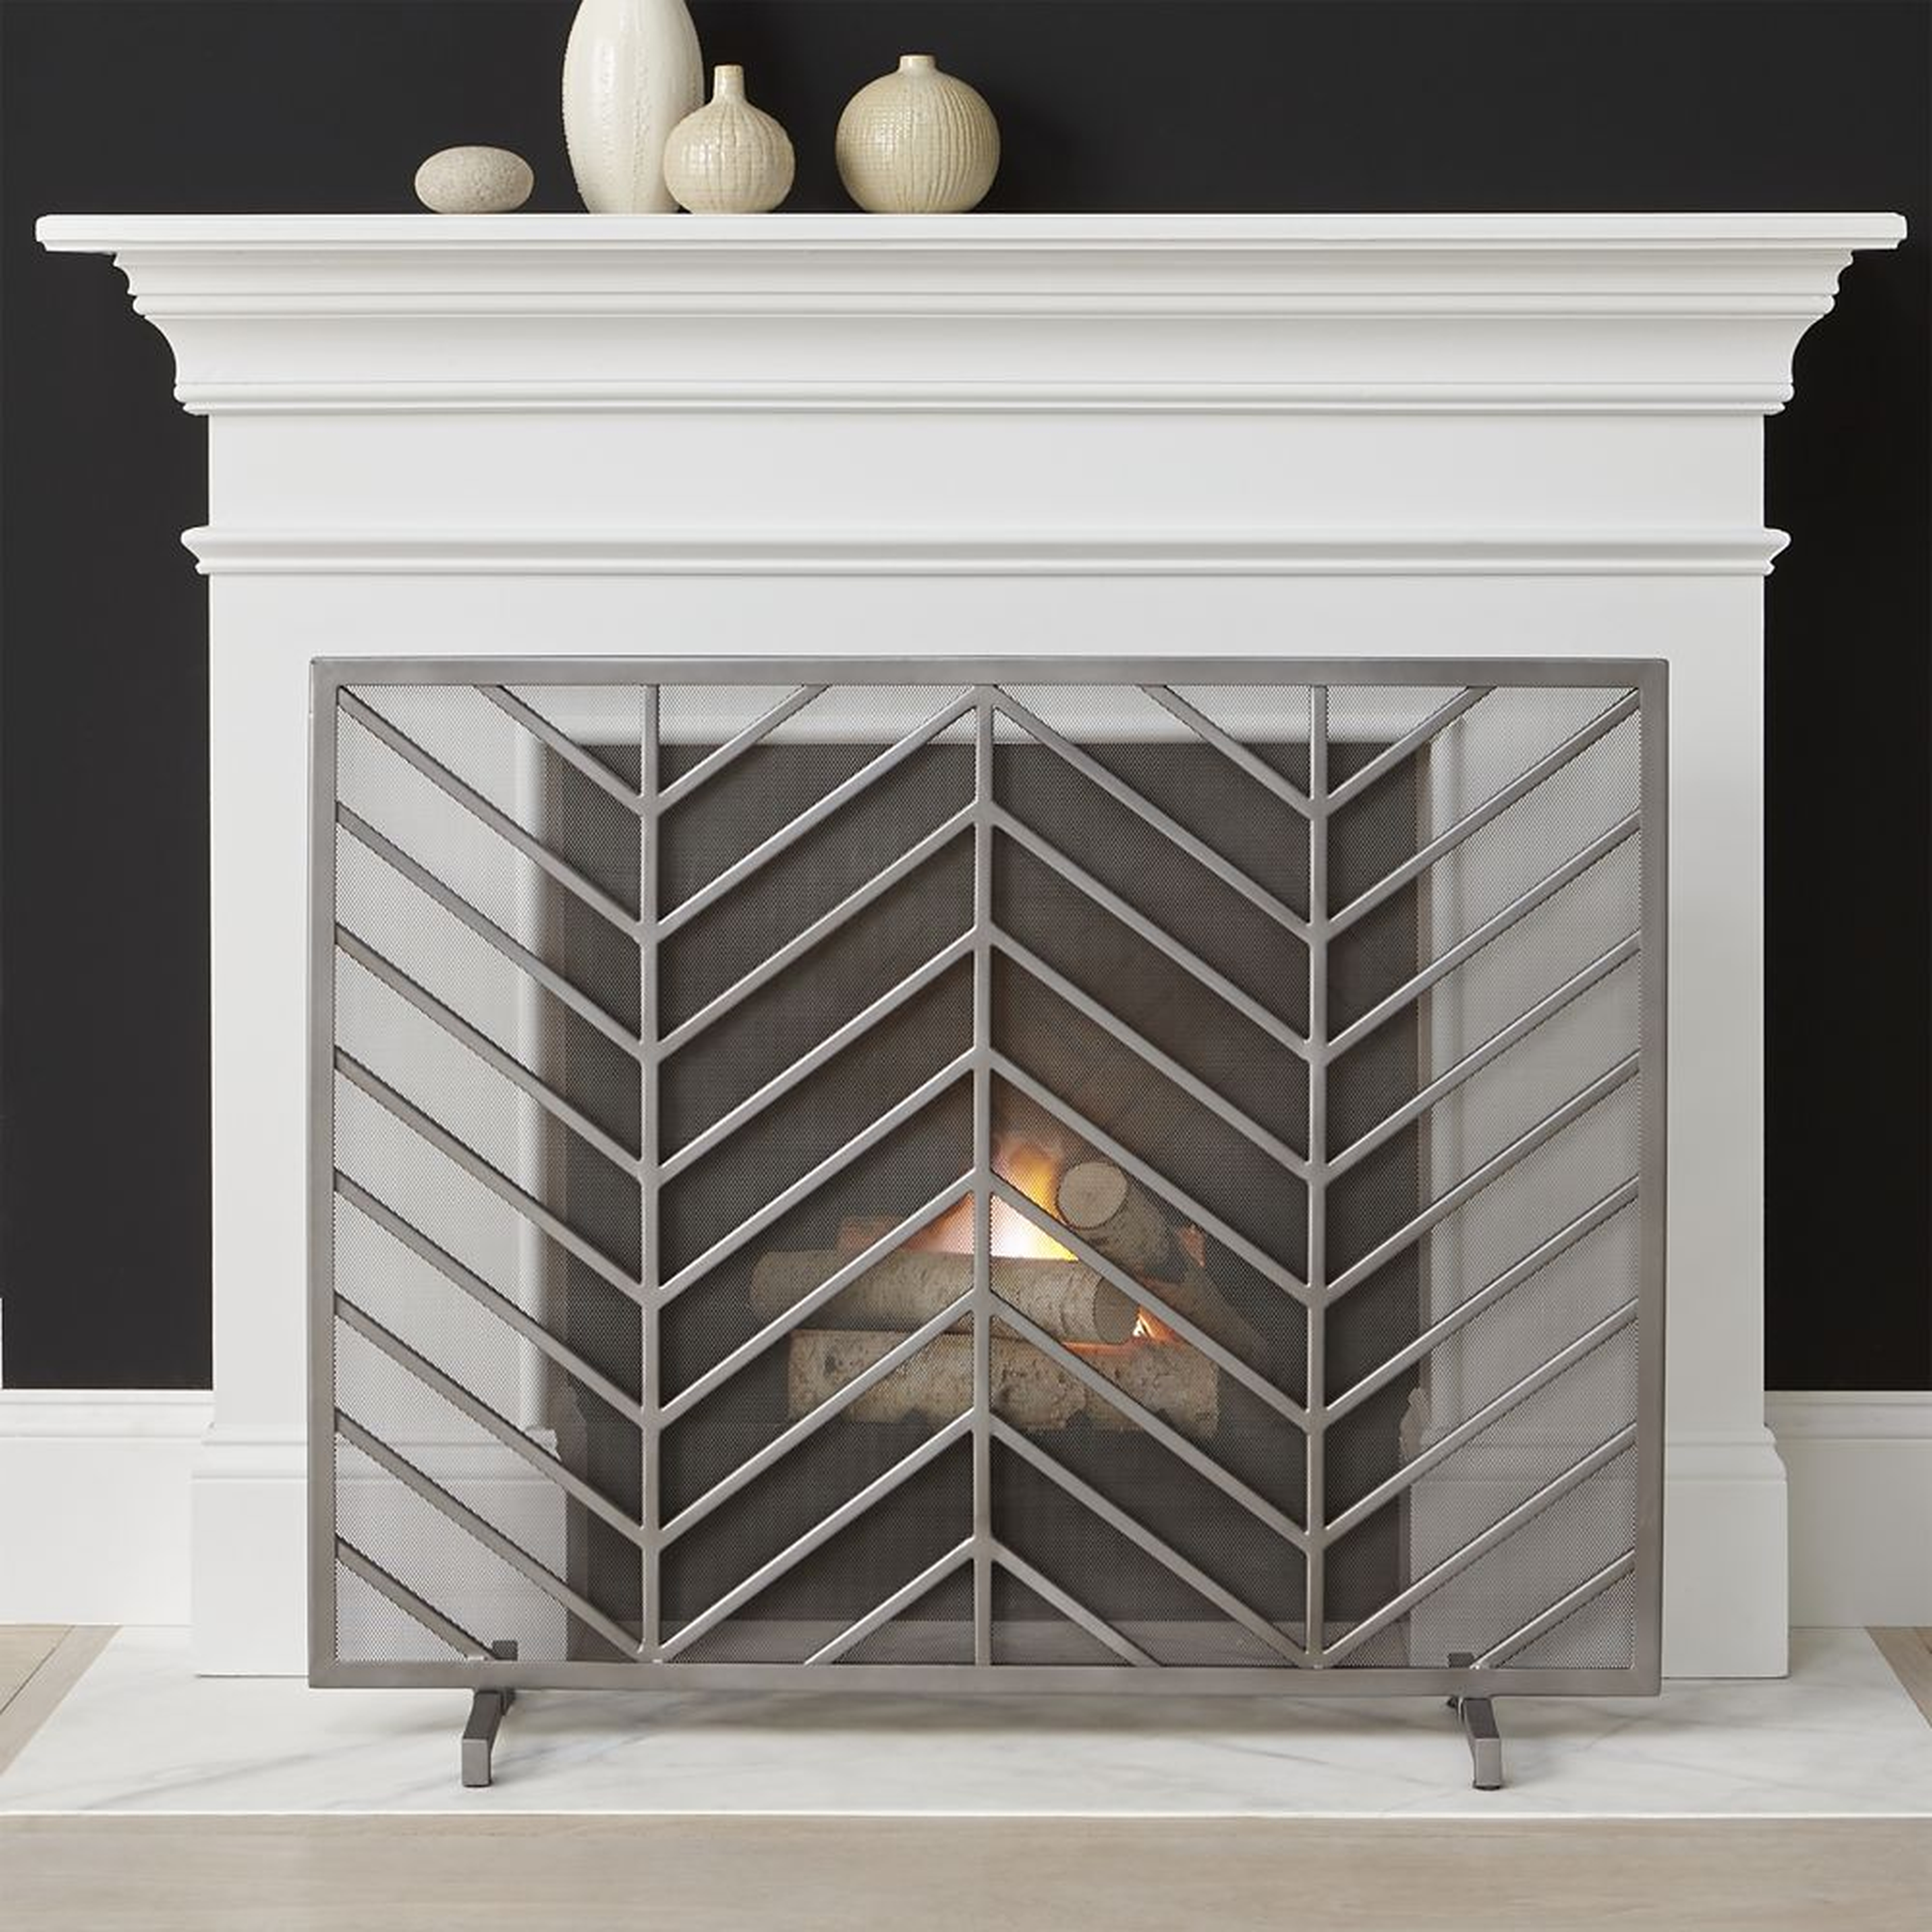 Chevron Fireplace Screen - Crate and Barrel